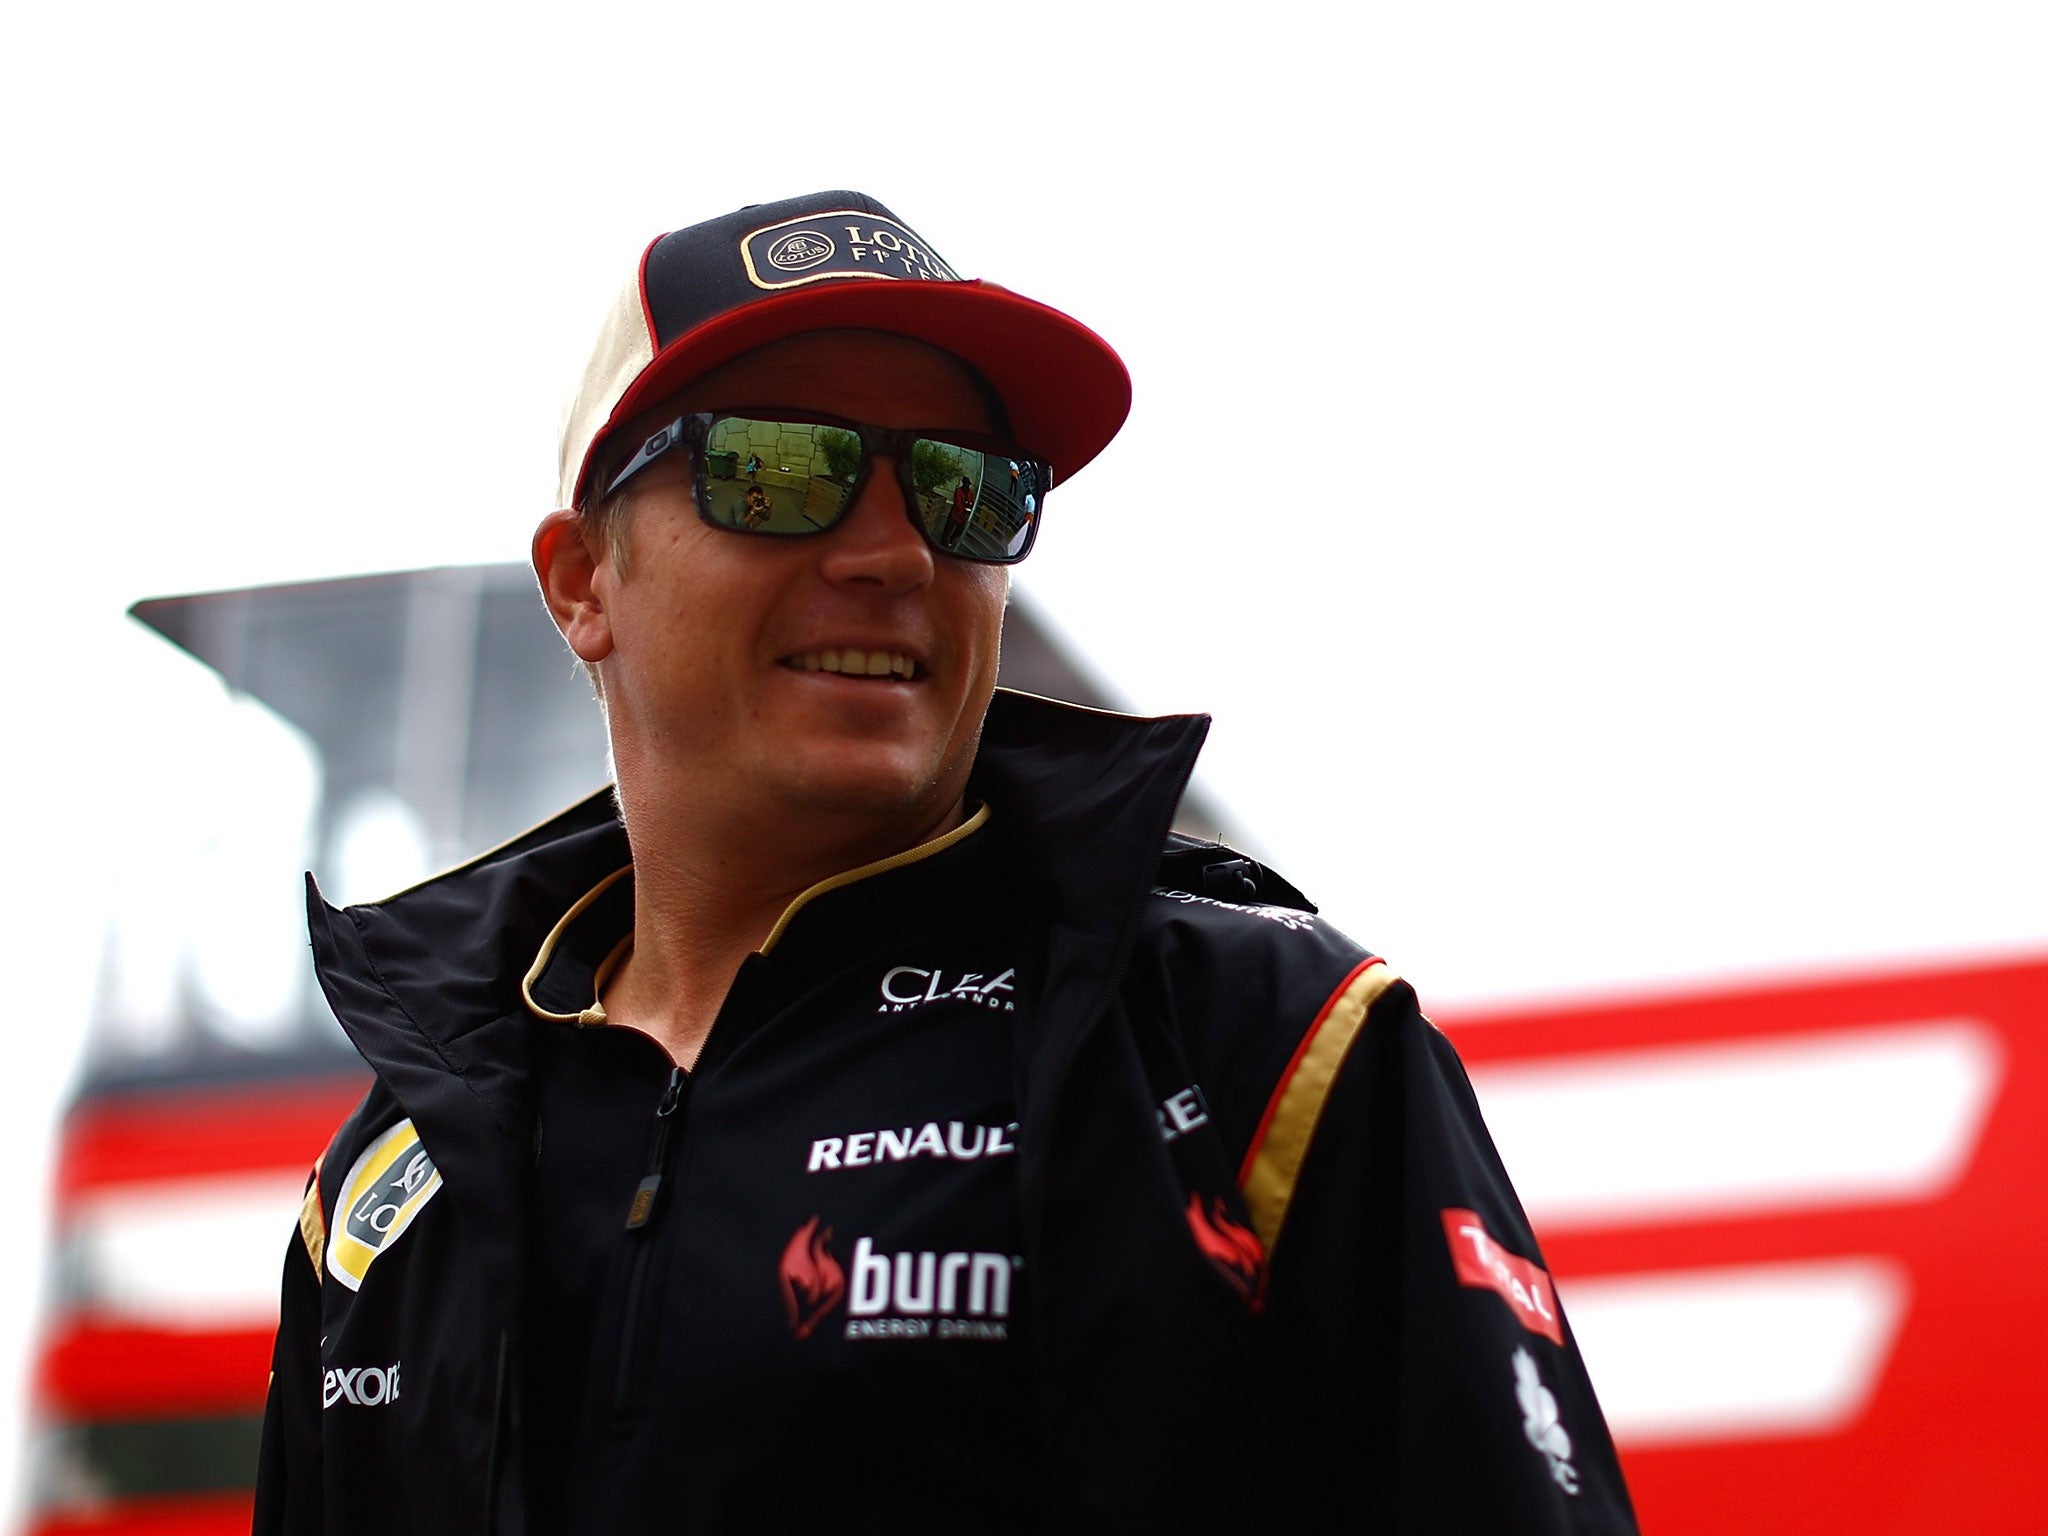 Martin Whitmarsh, has hinted he may yet make a move for Kimi Raikkonen (pictured) after failing to sign him last year